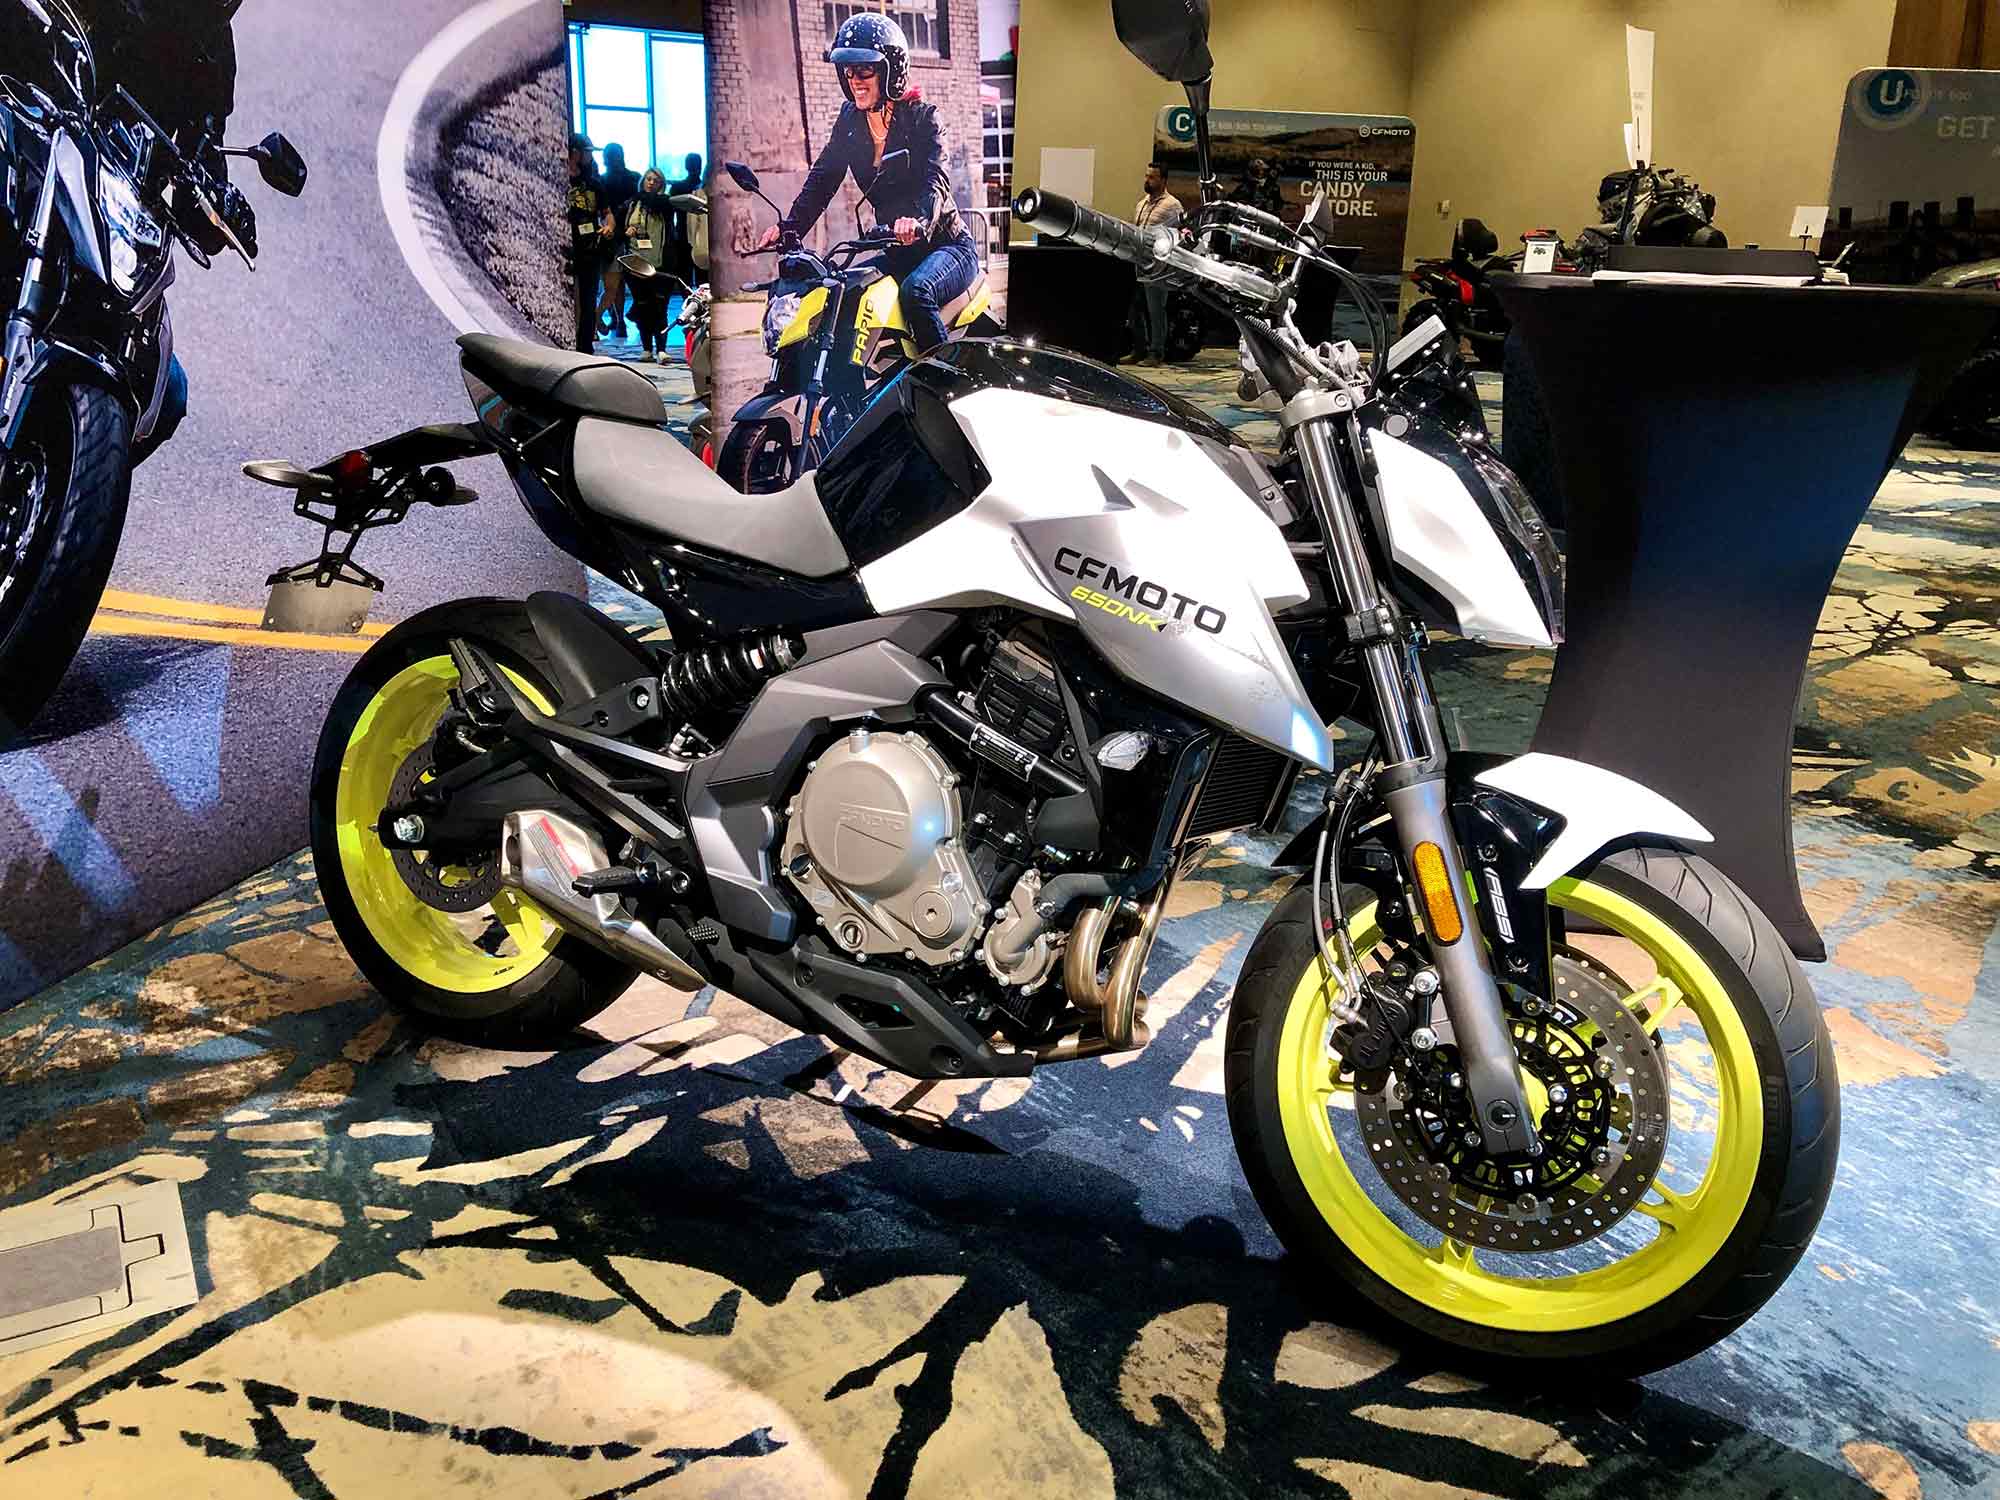 Cfmoto To Enter Us Market With Four New Motorcycles Cycle World